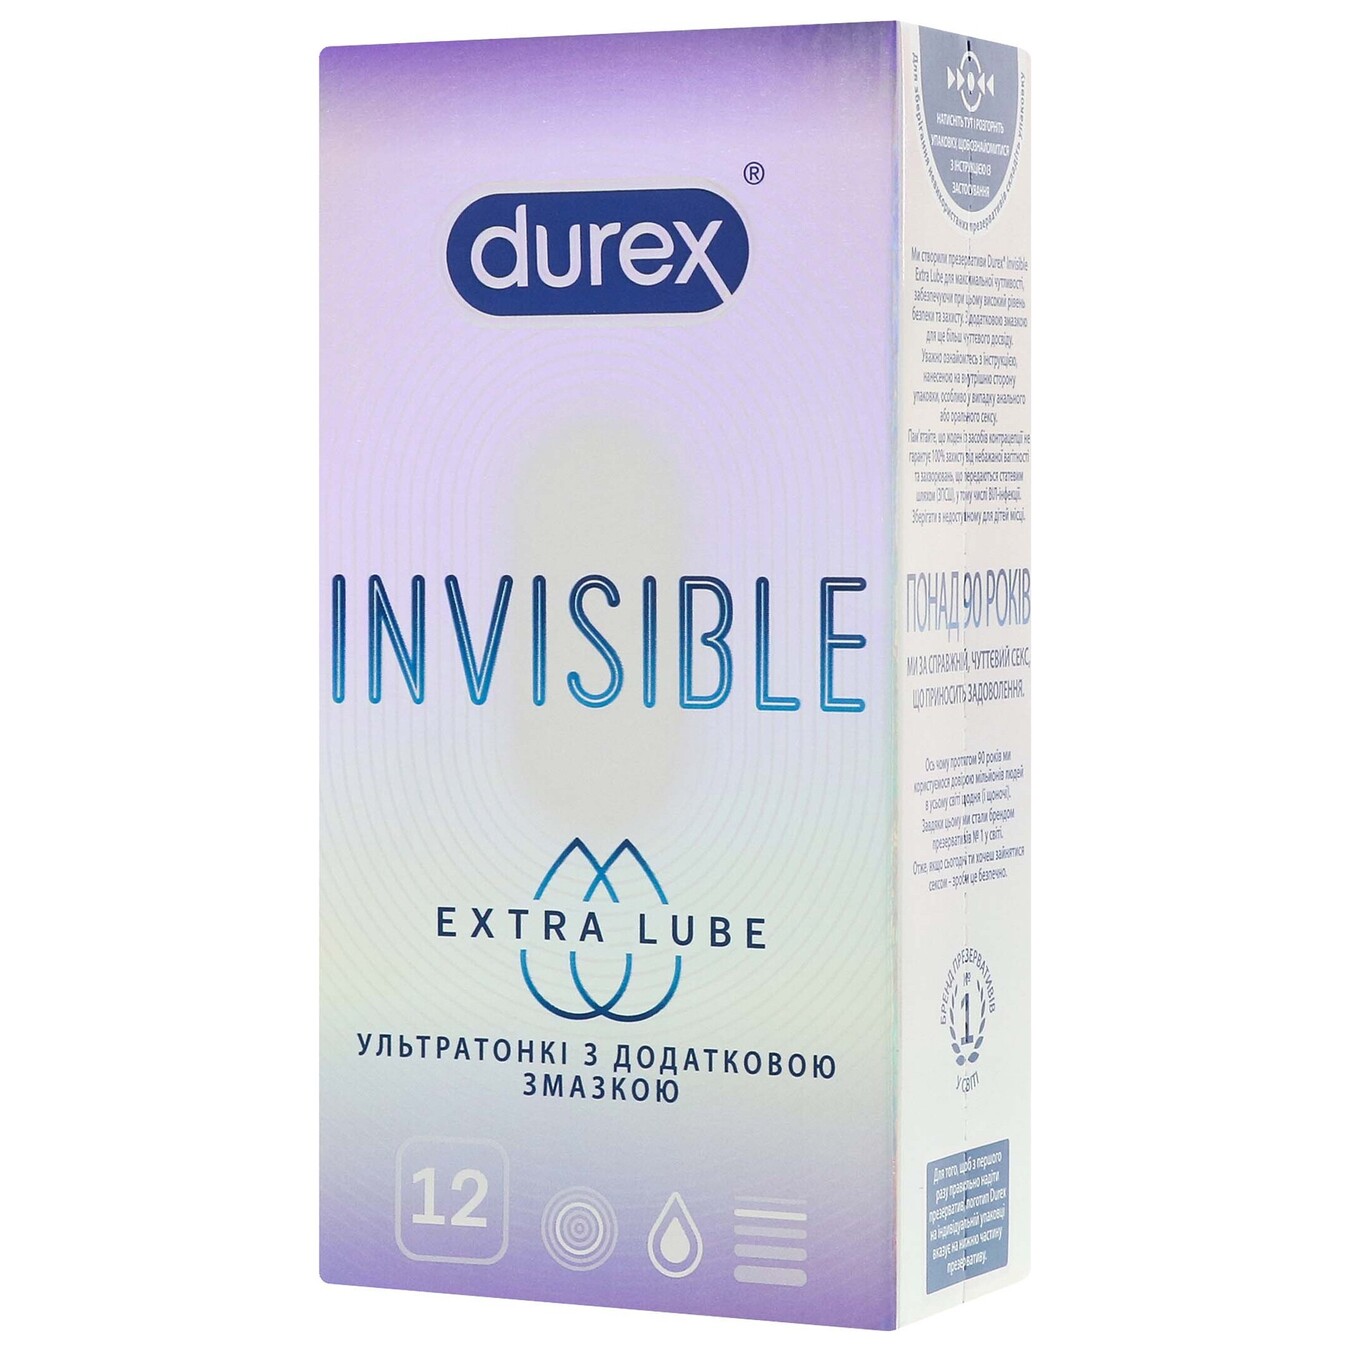 Durex #12 Invisible Extra Lube latex condoms with lubricant 2